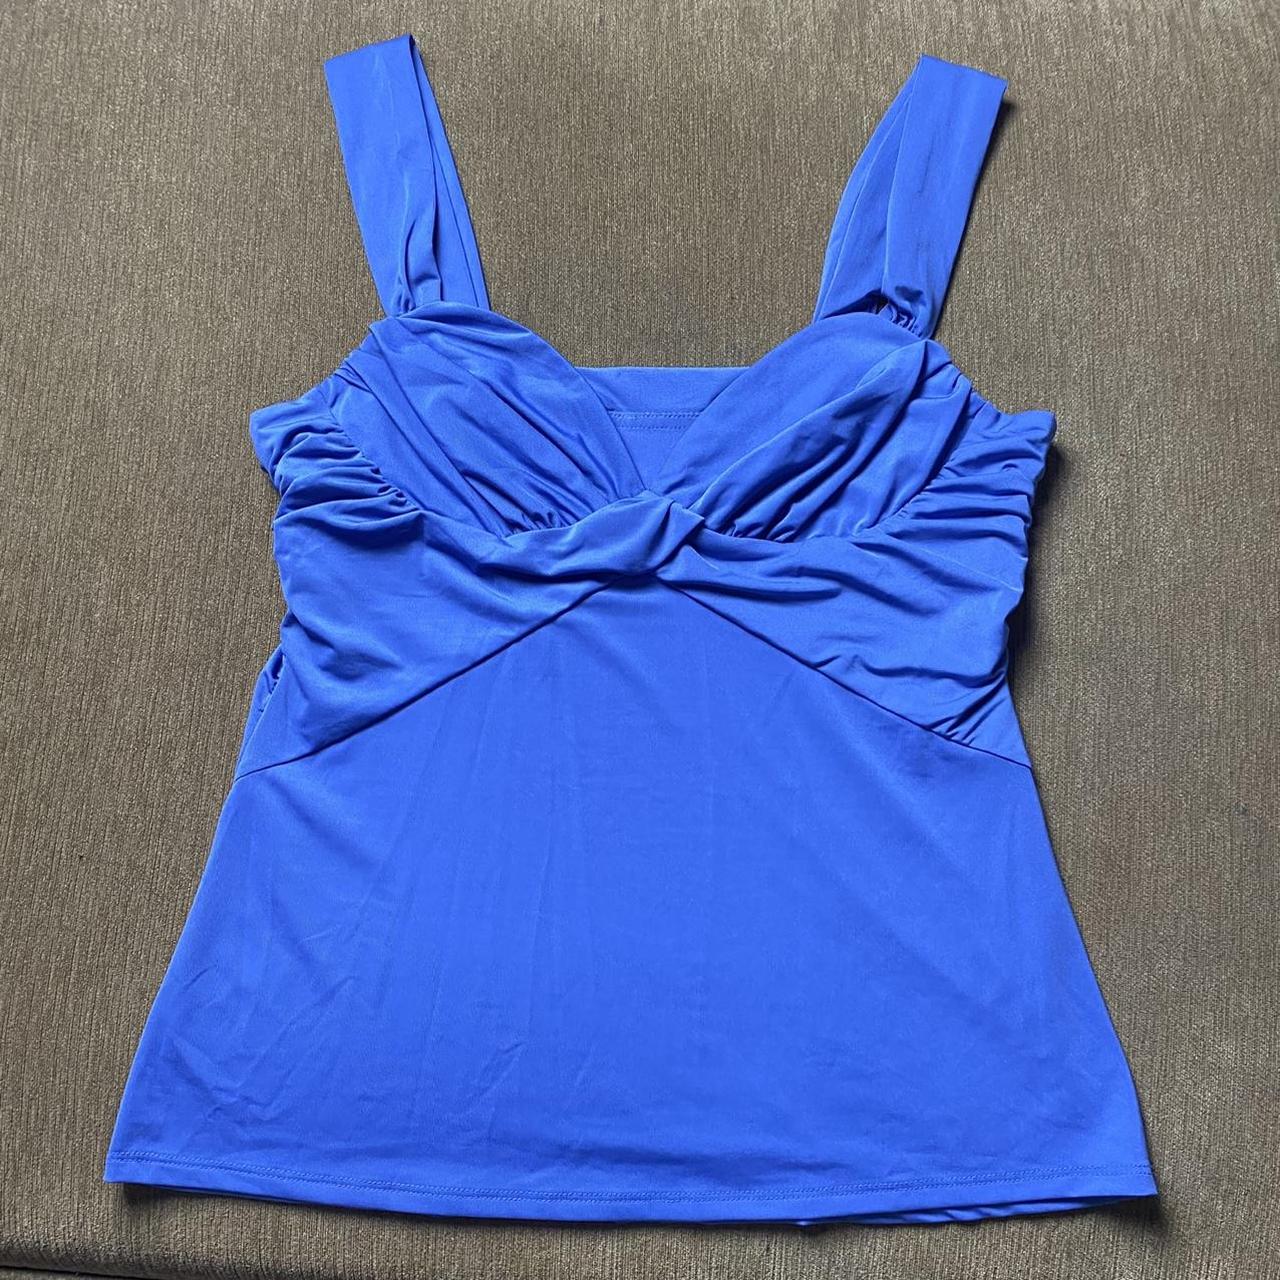 FREDERICK’S OF HOLLYWOOD Y2K BLUE TOP💙 Adorable and... - Depop